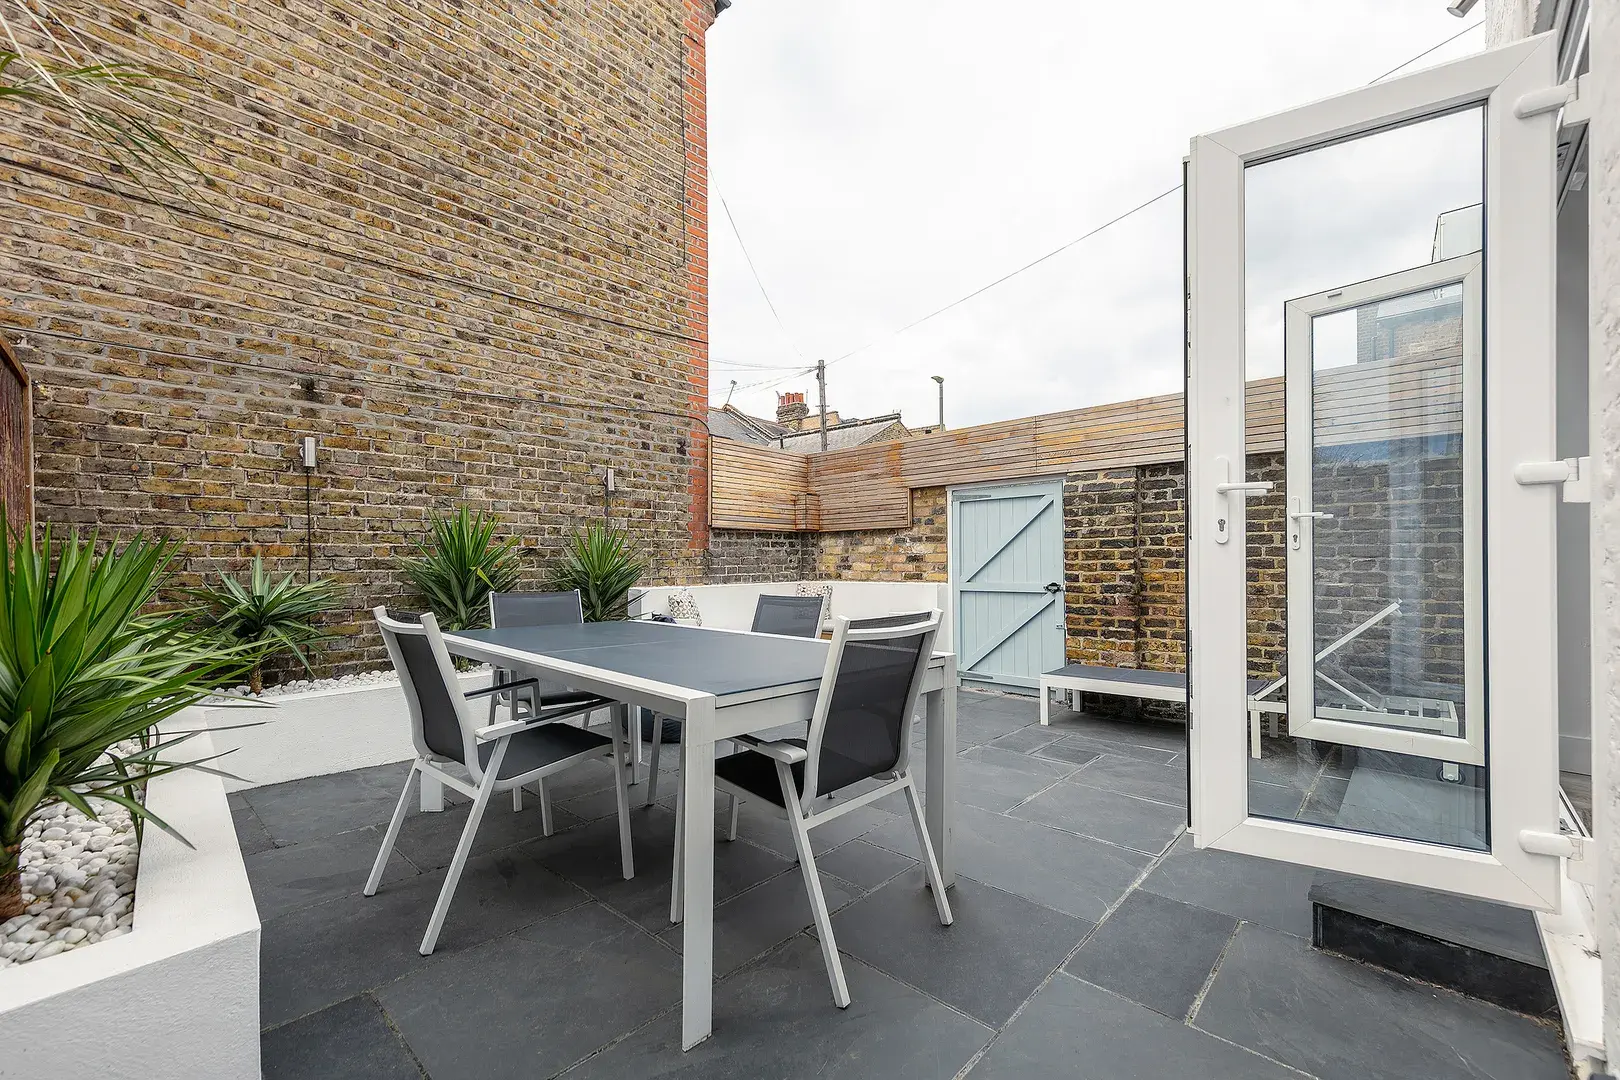 Bellamy Street, holiday home in Clapham, London